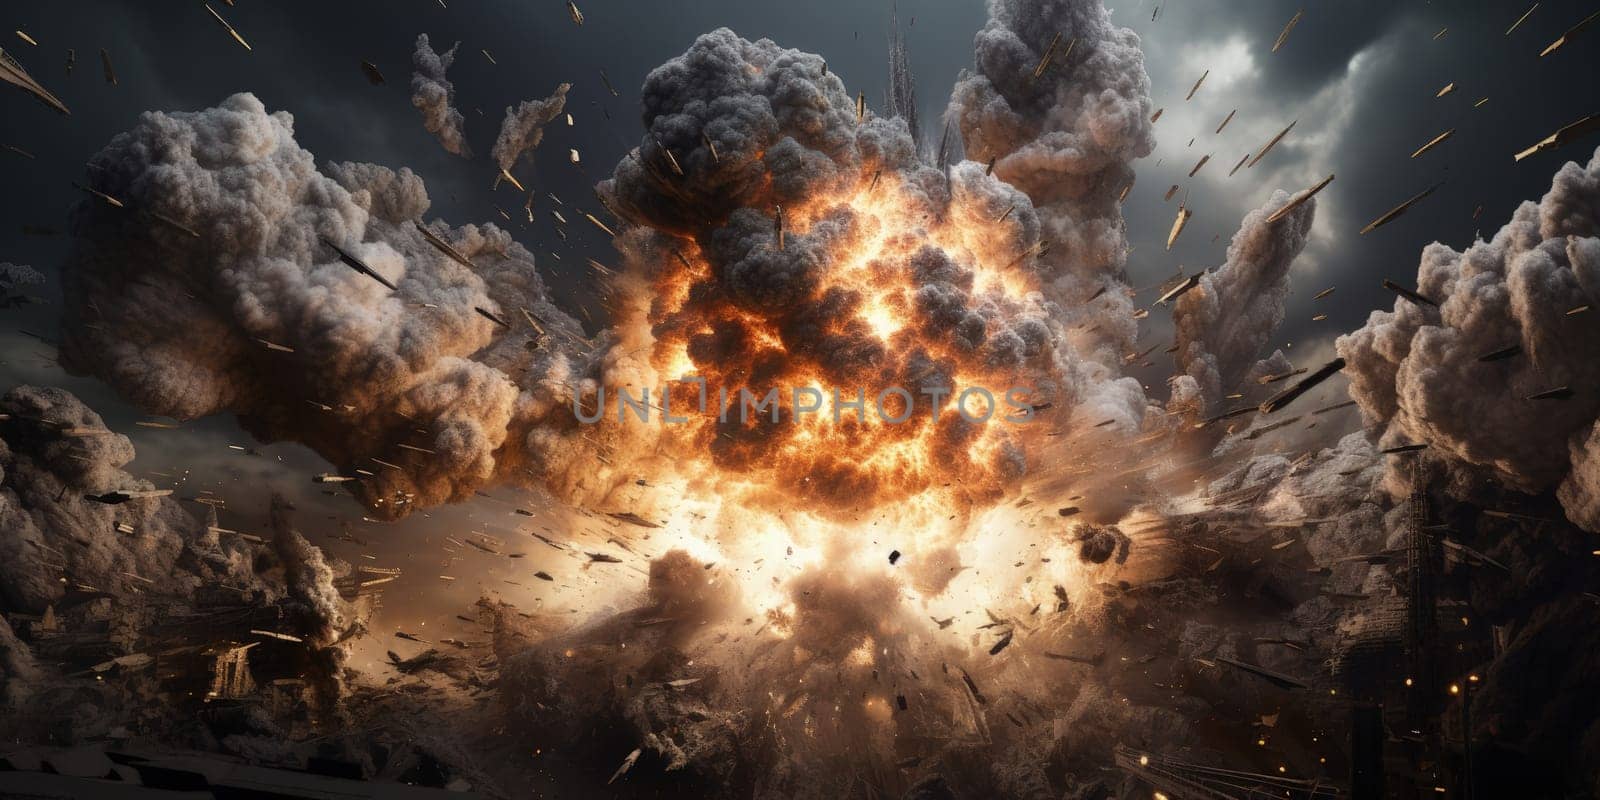 A detailed of an explosion scene, emphasizing pulverized effect with finely dispersed debris and particles by Kadula